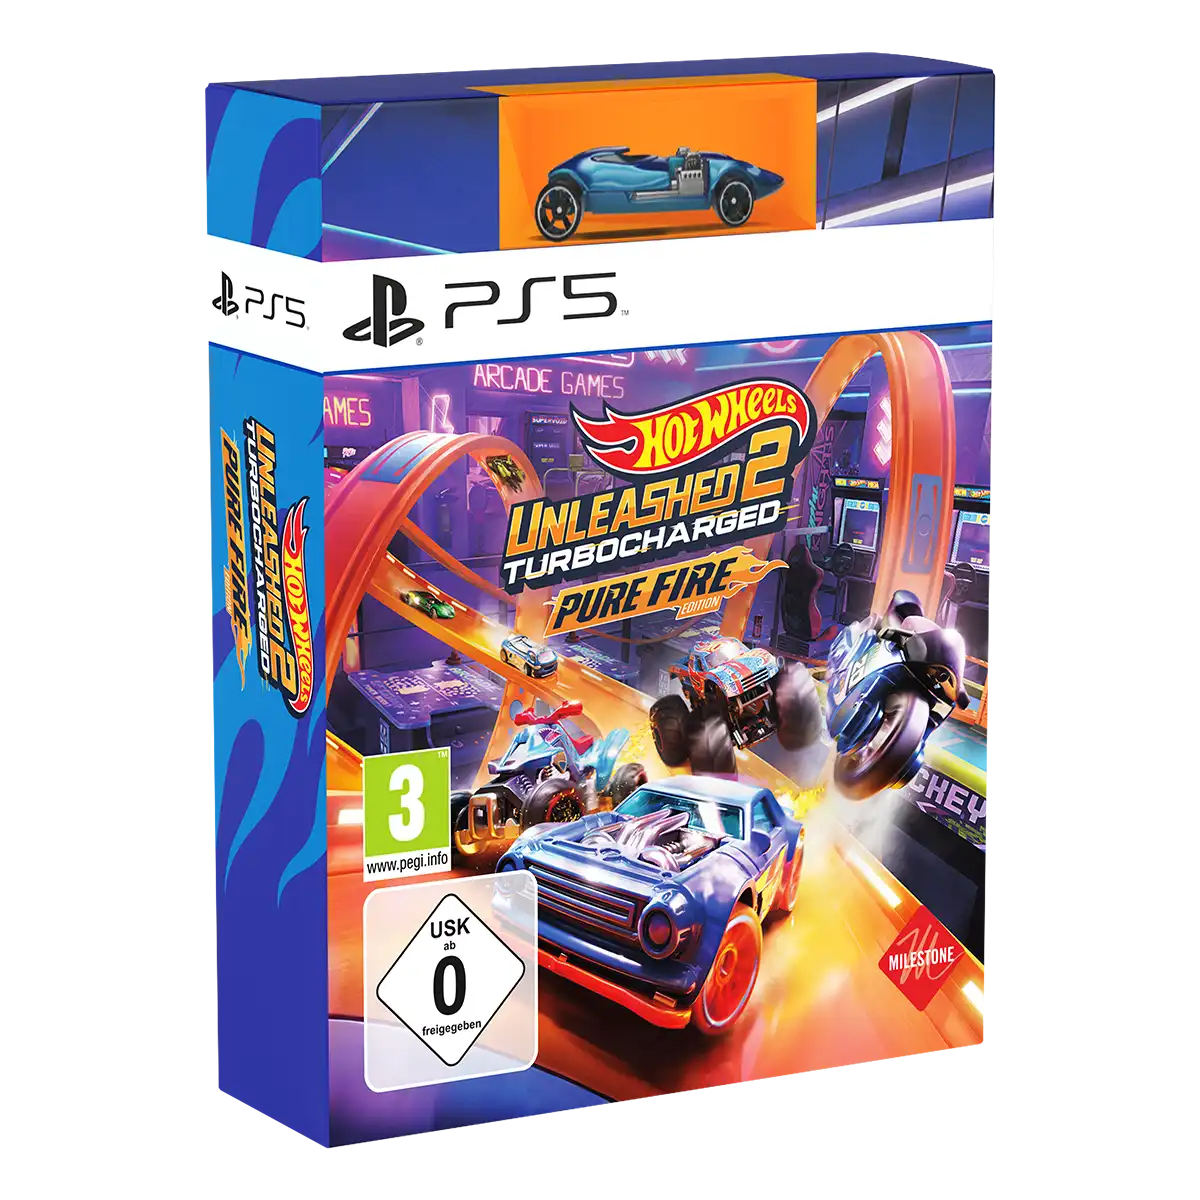 HOT WHEELS UNLEASHED™ 2 - Turbocharged - Deluxe Edition